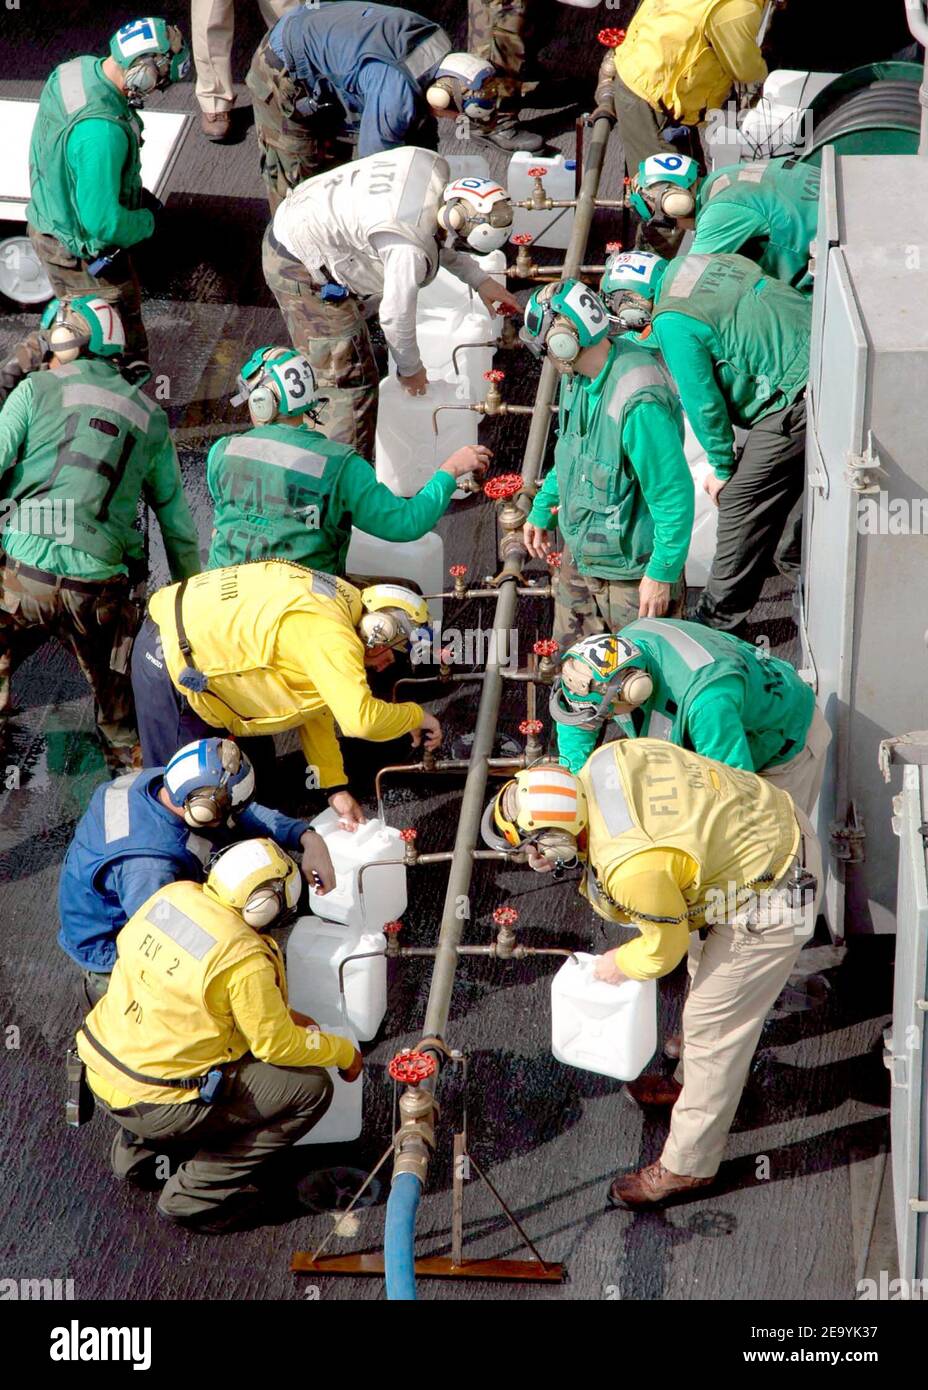 Crew members aboard USS Abraham Lincoln (CVN 72) fill jugs with purified water from a Potable Water Manifold. The Repair Division aboard Lincoln constructed the manifold in eight hours. The water jugs will be flown by Navy helicopters to regions isolated by the Tsunami in Sumatra, Indonesia. Helicopters assigned to Carrier Air Wing Two (CVW-2) and Sailors from Abraham Lincoln are supporting Operation Unified Assistance, the humanitarian operation effort in the wake of the Tsunami that struck South East Asia. Photo by Cristina R. Morrison/USN via ABACA. Stock Photo